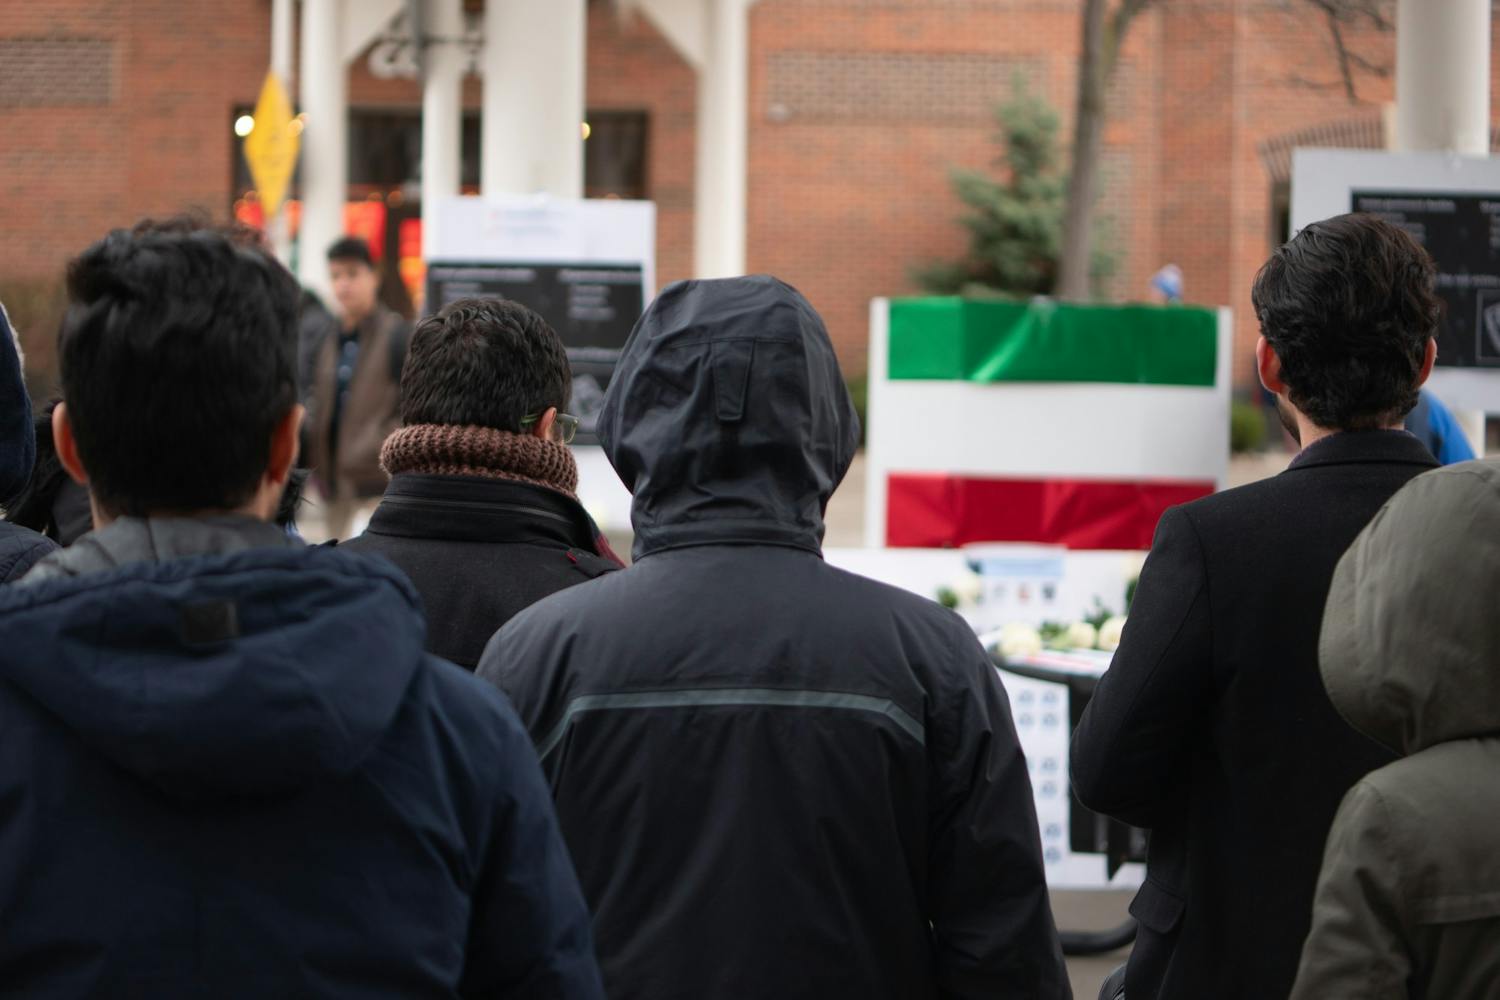 Iranian students and their supporters stand in solidarity outside Student Union on Thursday. The students brought light to the situation in Iran.